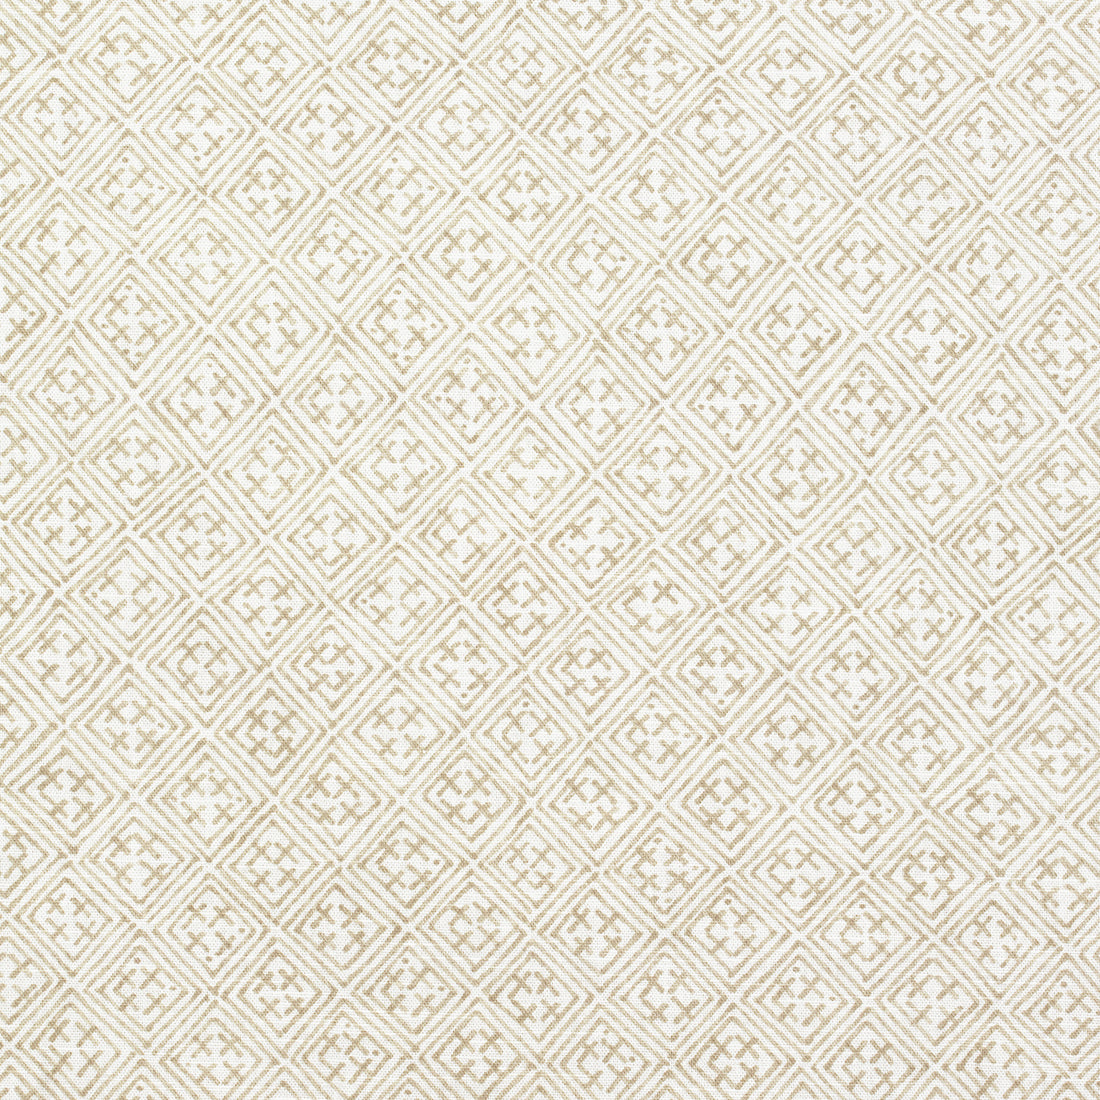 Laos fabric in beige color - pattern number F972618 - by Thibaut in the Chestnut Hill collection